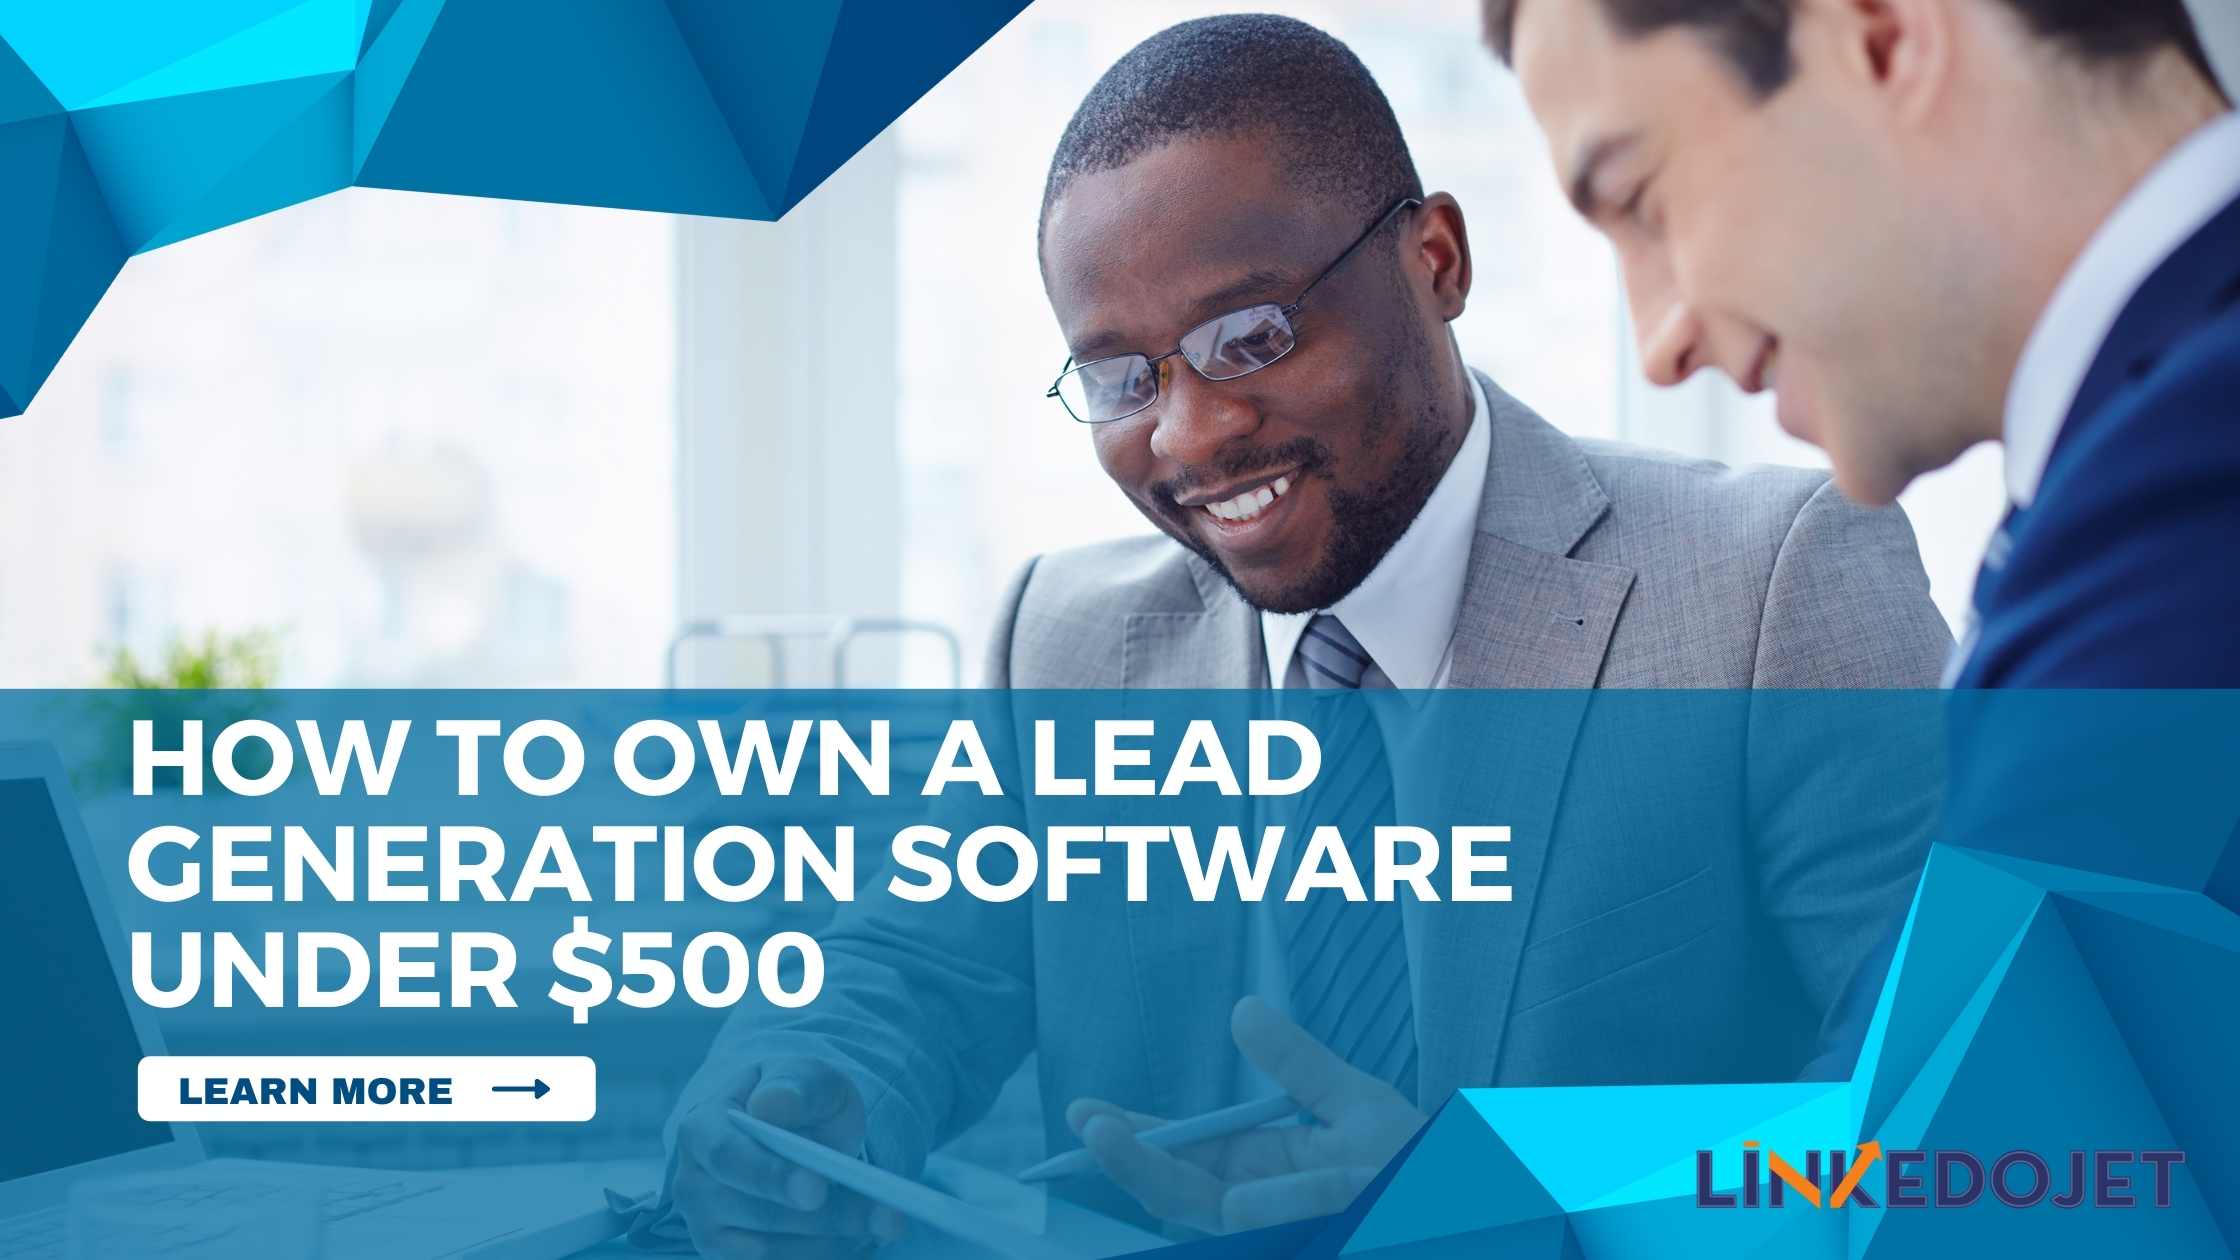 How to Own a Lead Generation Software Under $500?